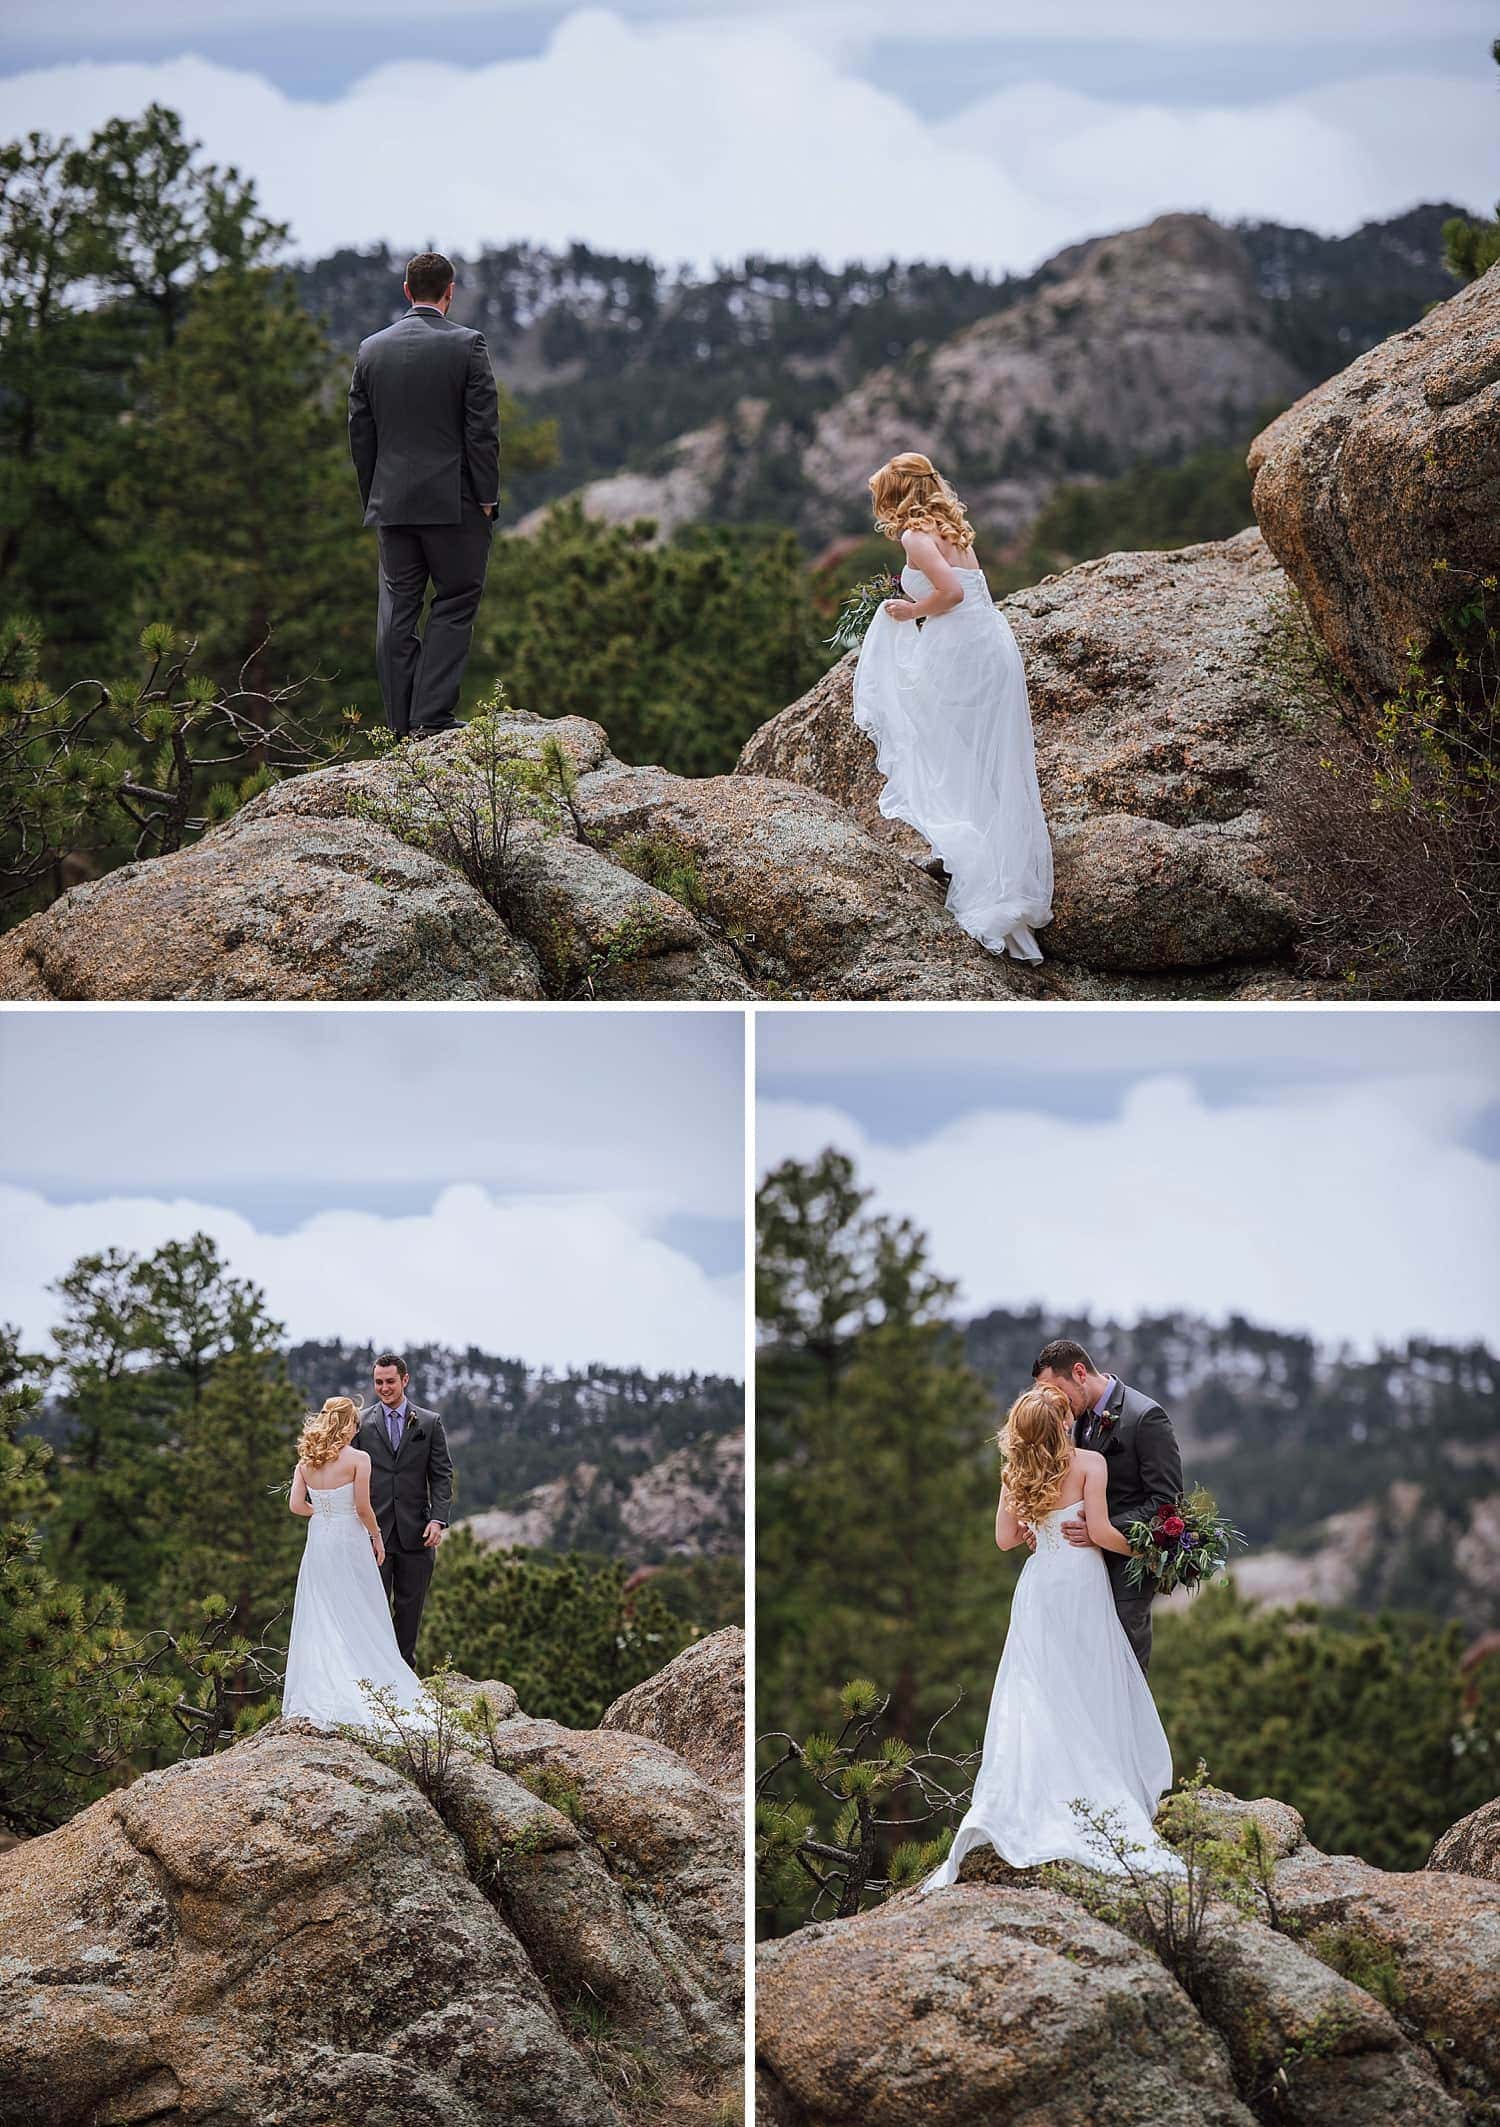 Bride climbs up rock and approaches groom for first look at Sprague Lake, in Rocky Mountain National Park, Colorado. 